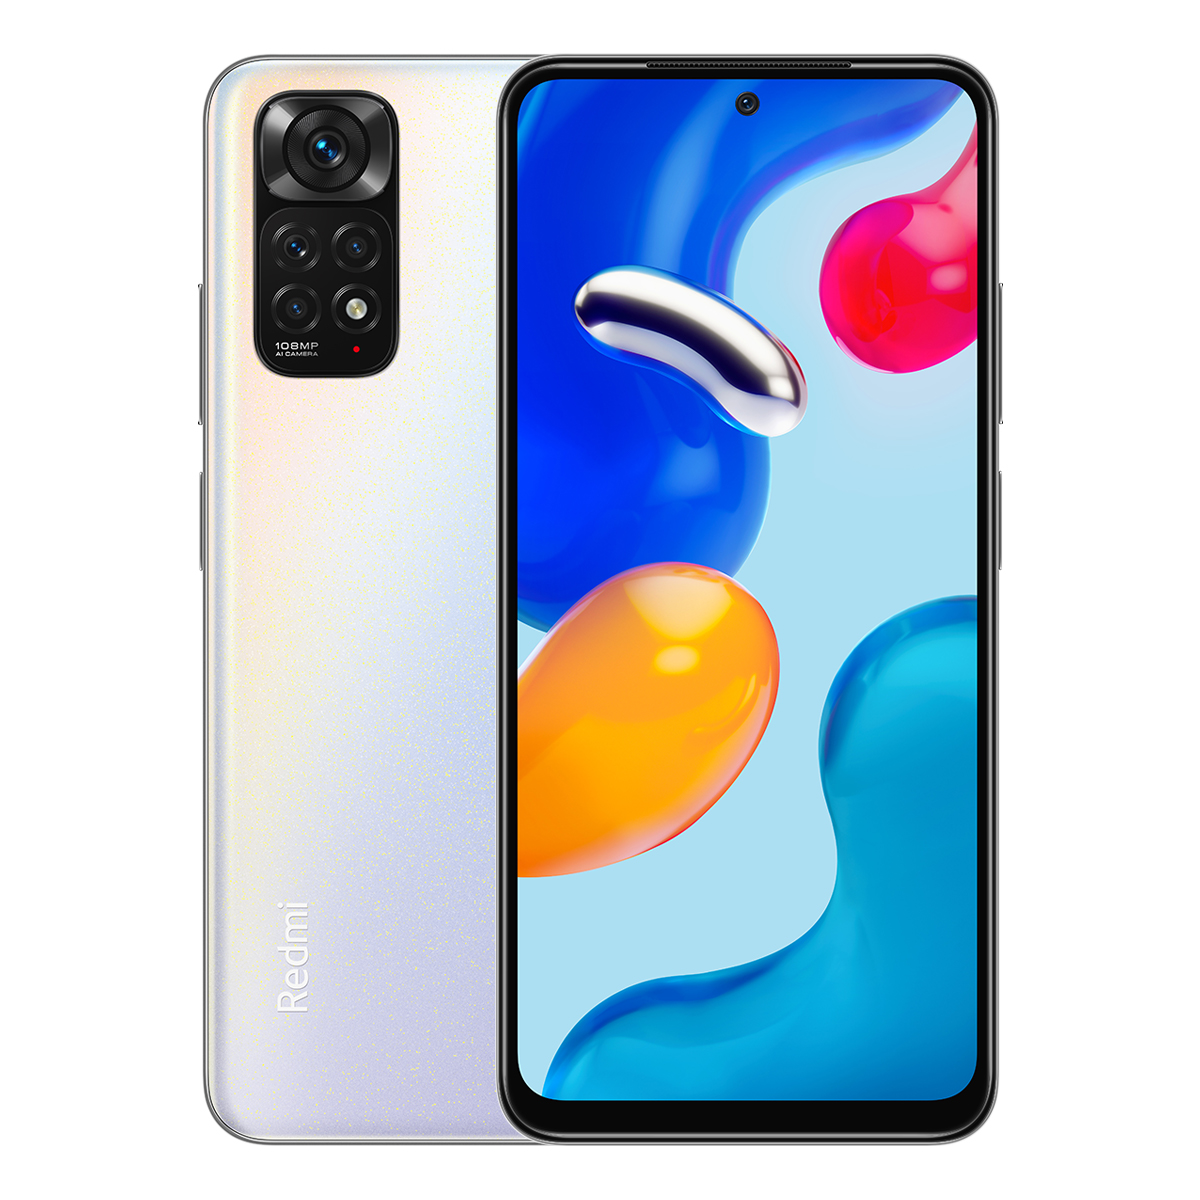 Find Xiaomi Redmi Note 11S Global Version Helio G96 108MP Quad Camera 33W Pro Fast Charge 64GB 128GB 6 43 inch 90Hz AMOLED Octa Core 4G Smartphone for Sale on Gipsybee.com with cryptocurrencies